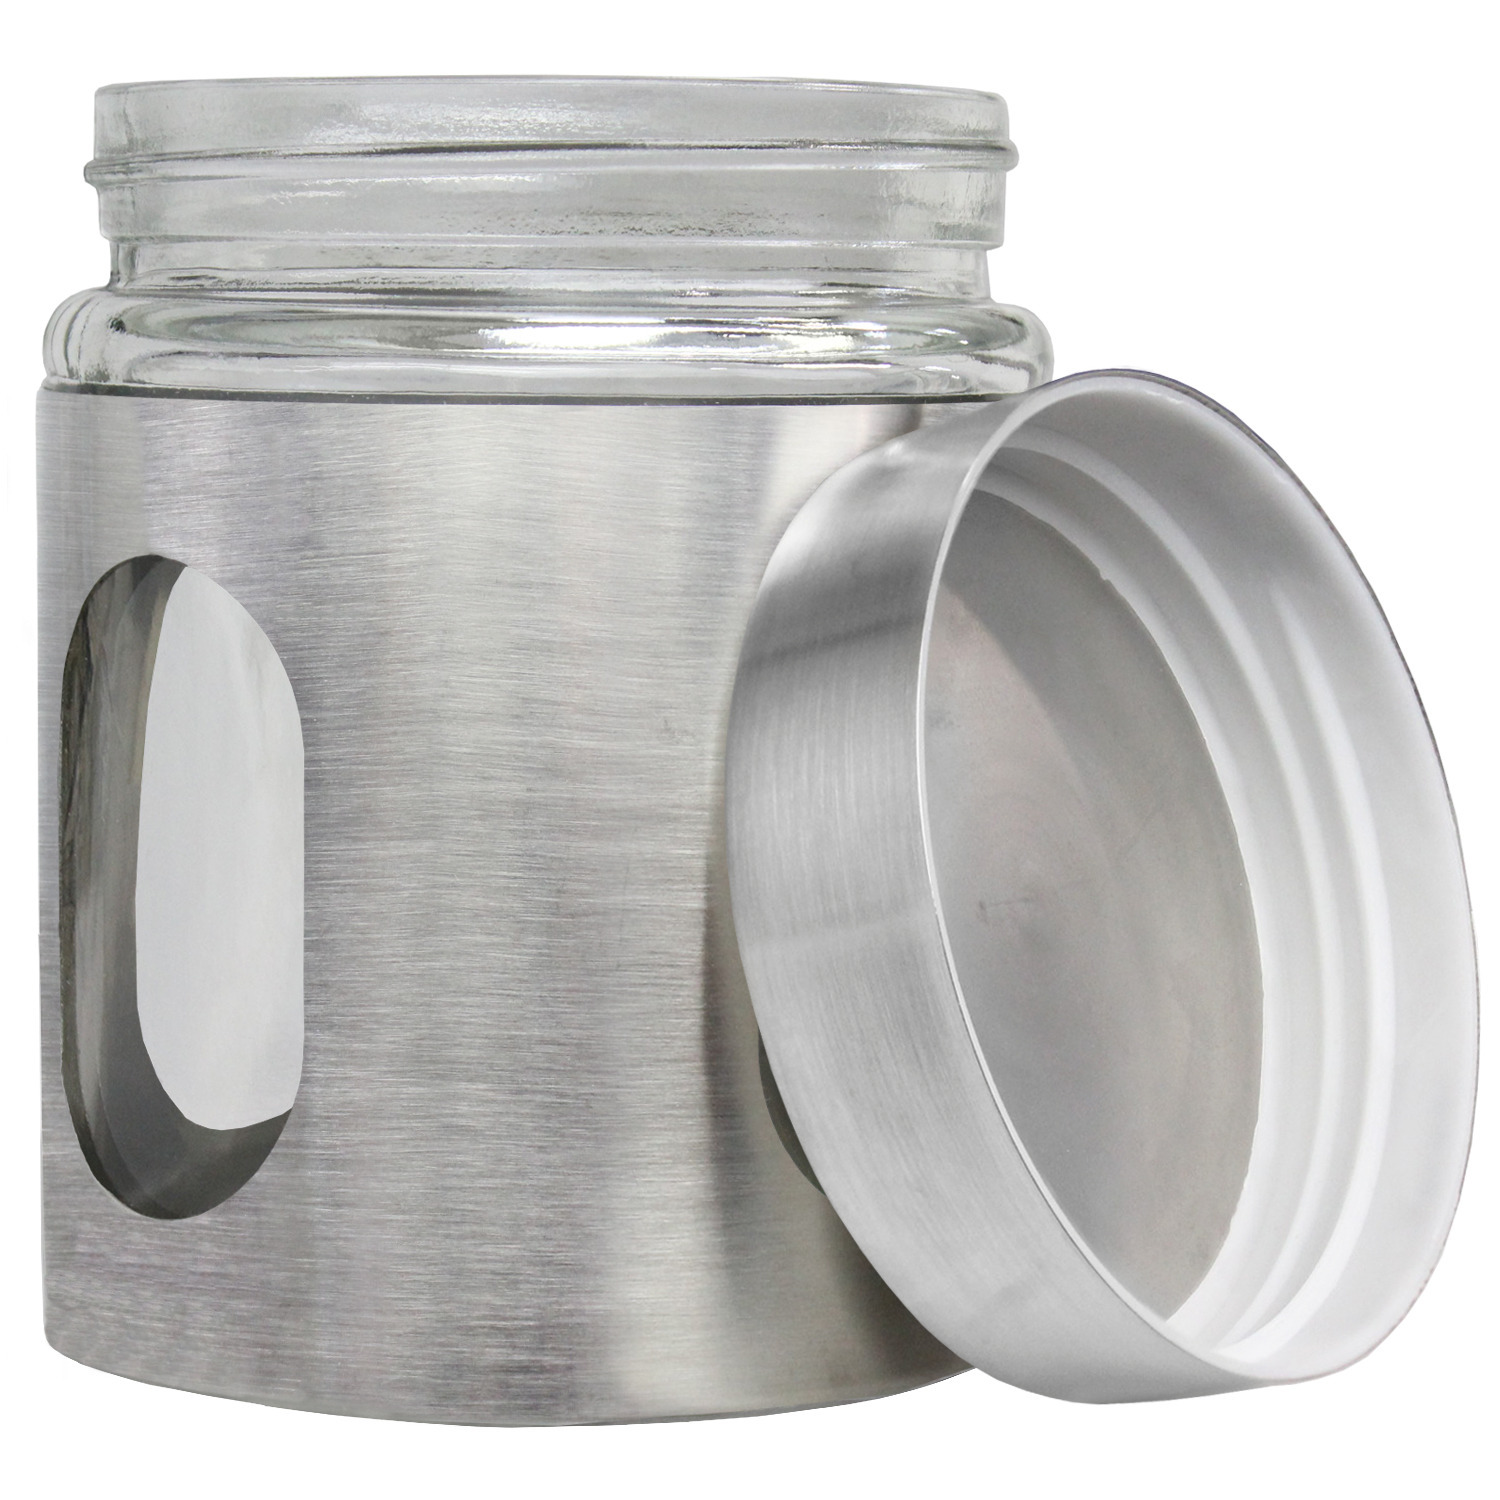 Blue Donuts 21oz Stainless Steel Canister with Window